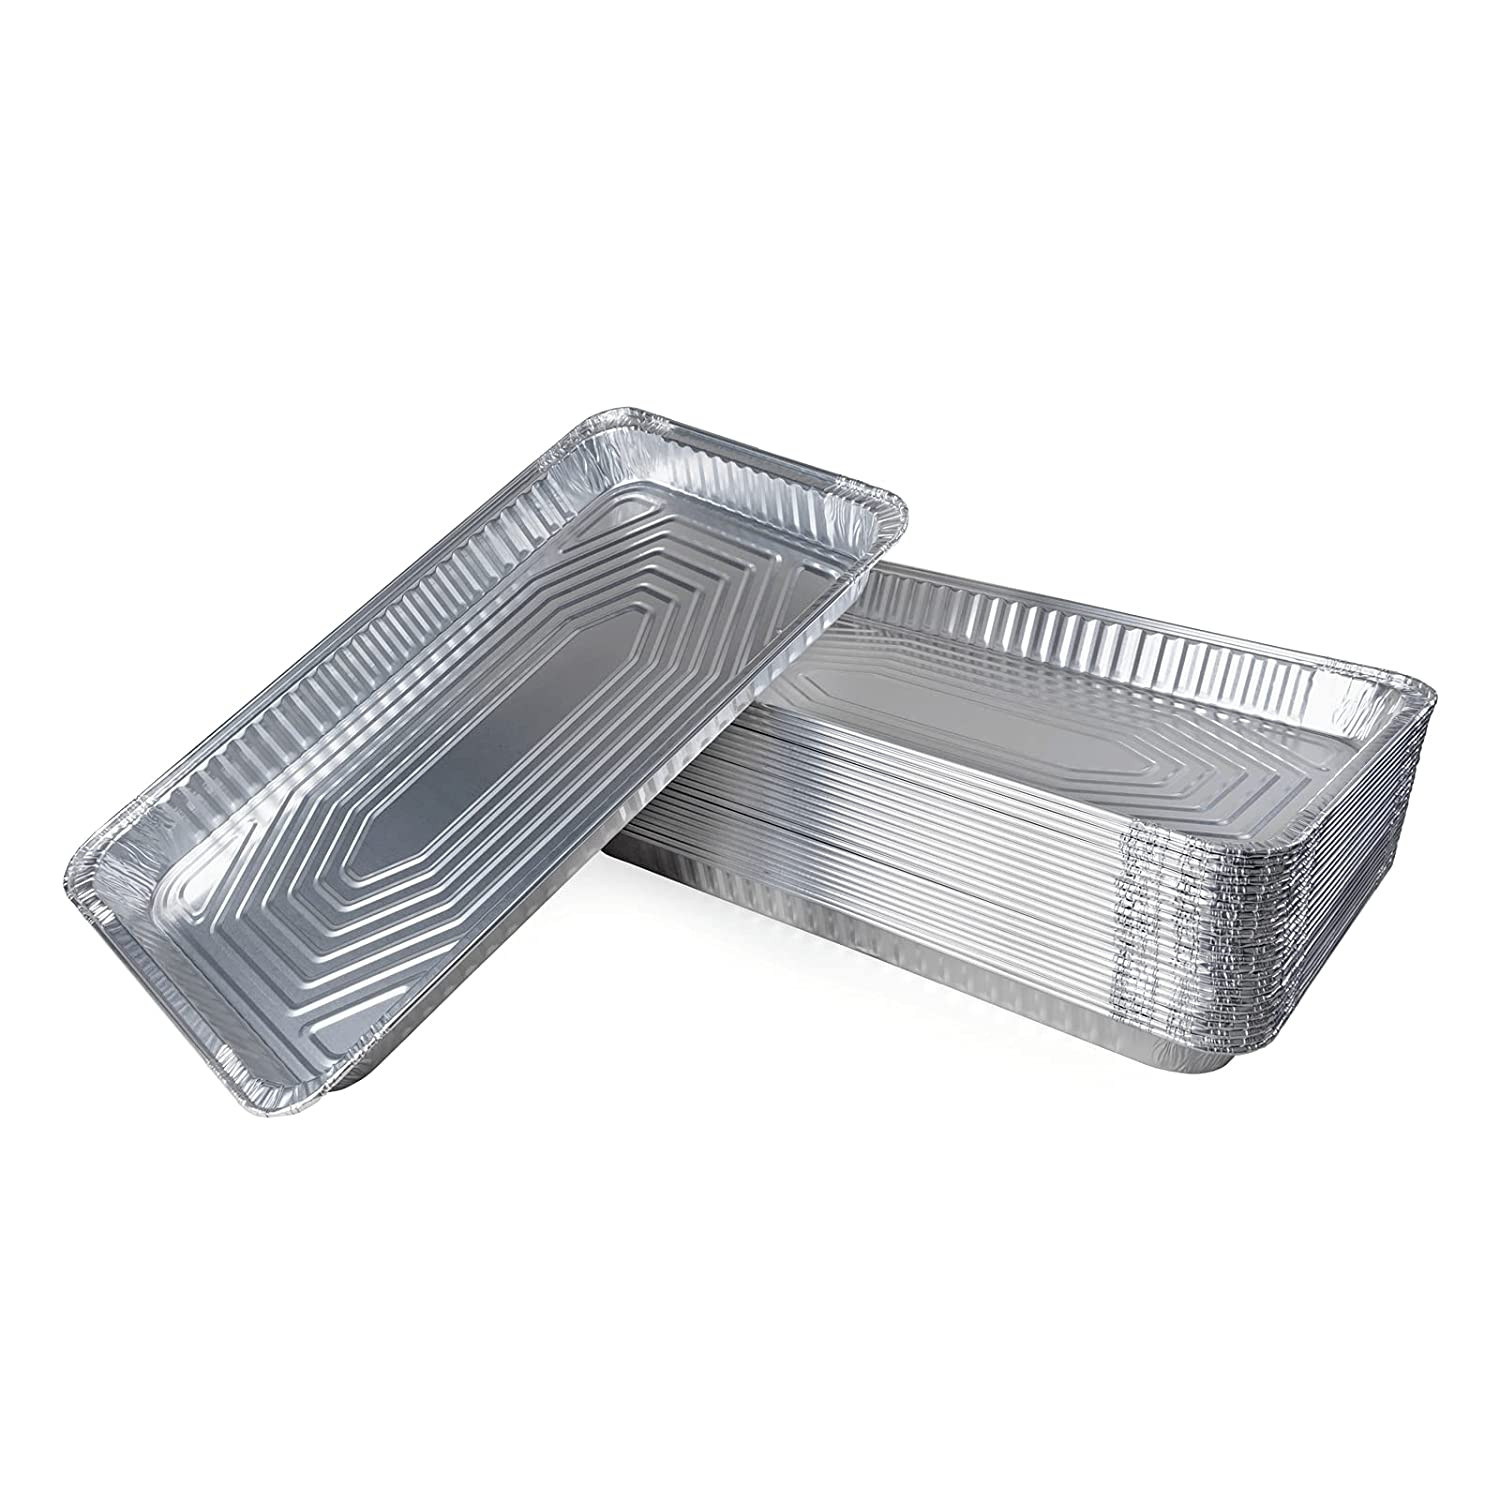 13 x 11 x 1.5 Half-Size Aluminum Steam Table Pans with Lids, Shallow buy  in stock in U.S. in IDL Packaging